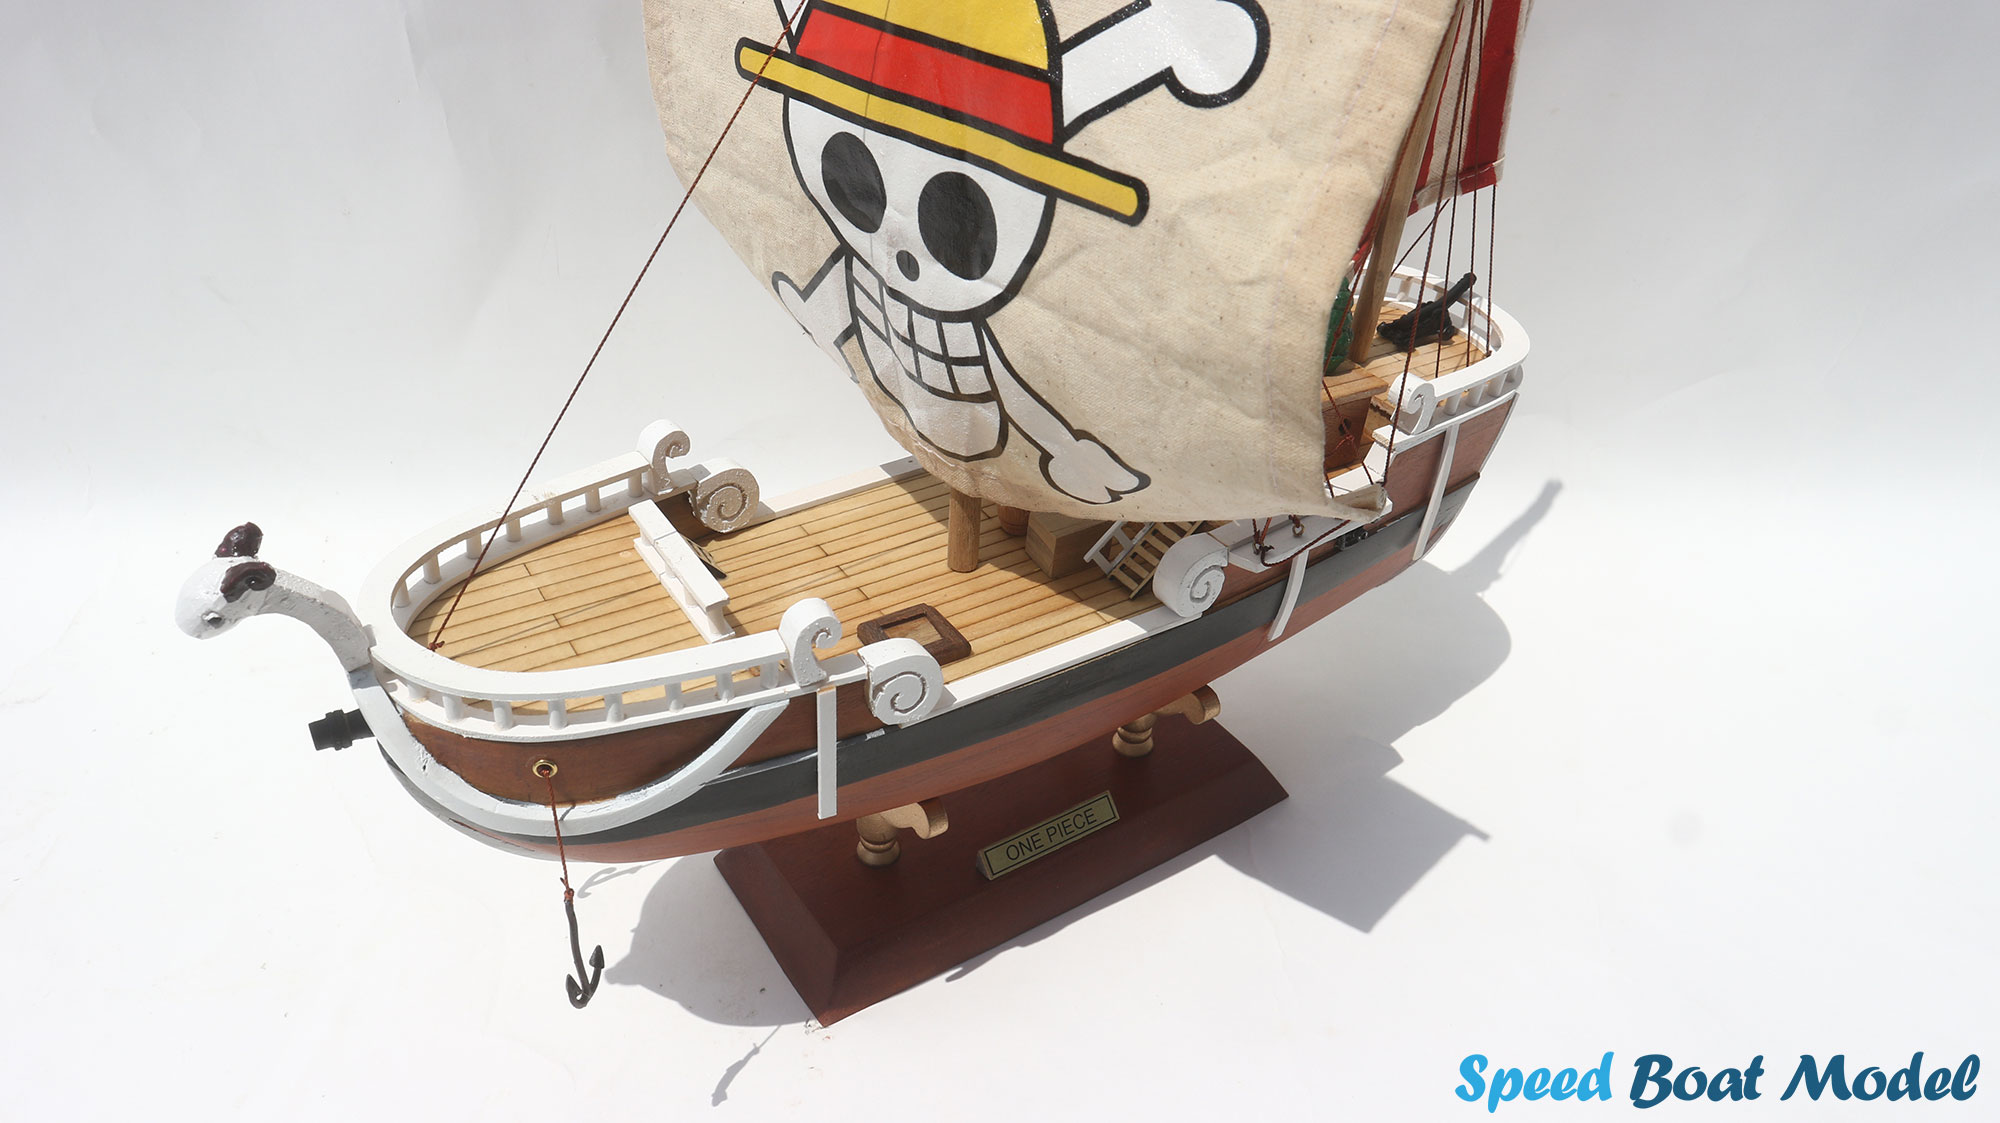 One Piece Commercial Ship Model 15.7